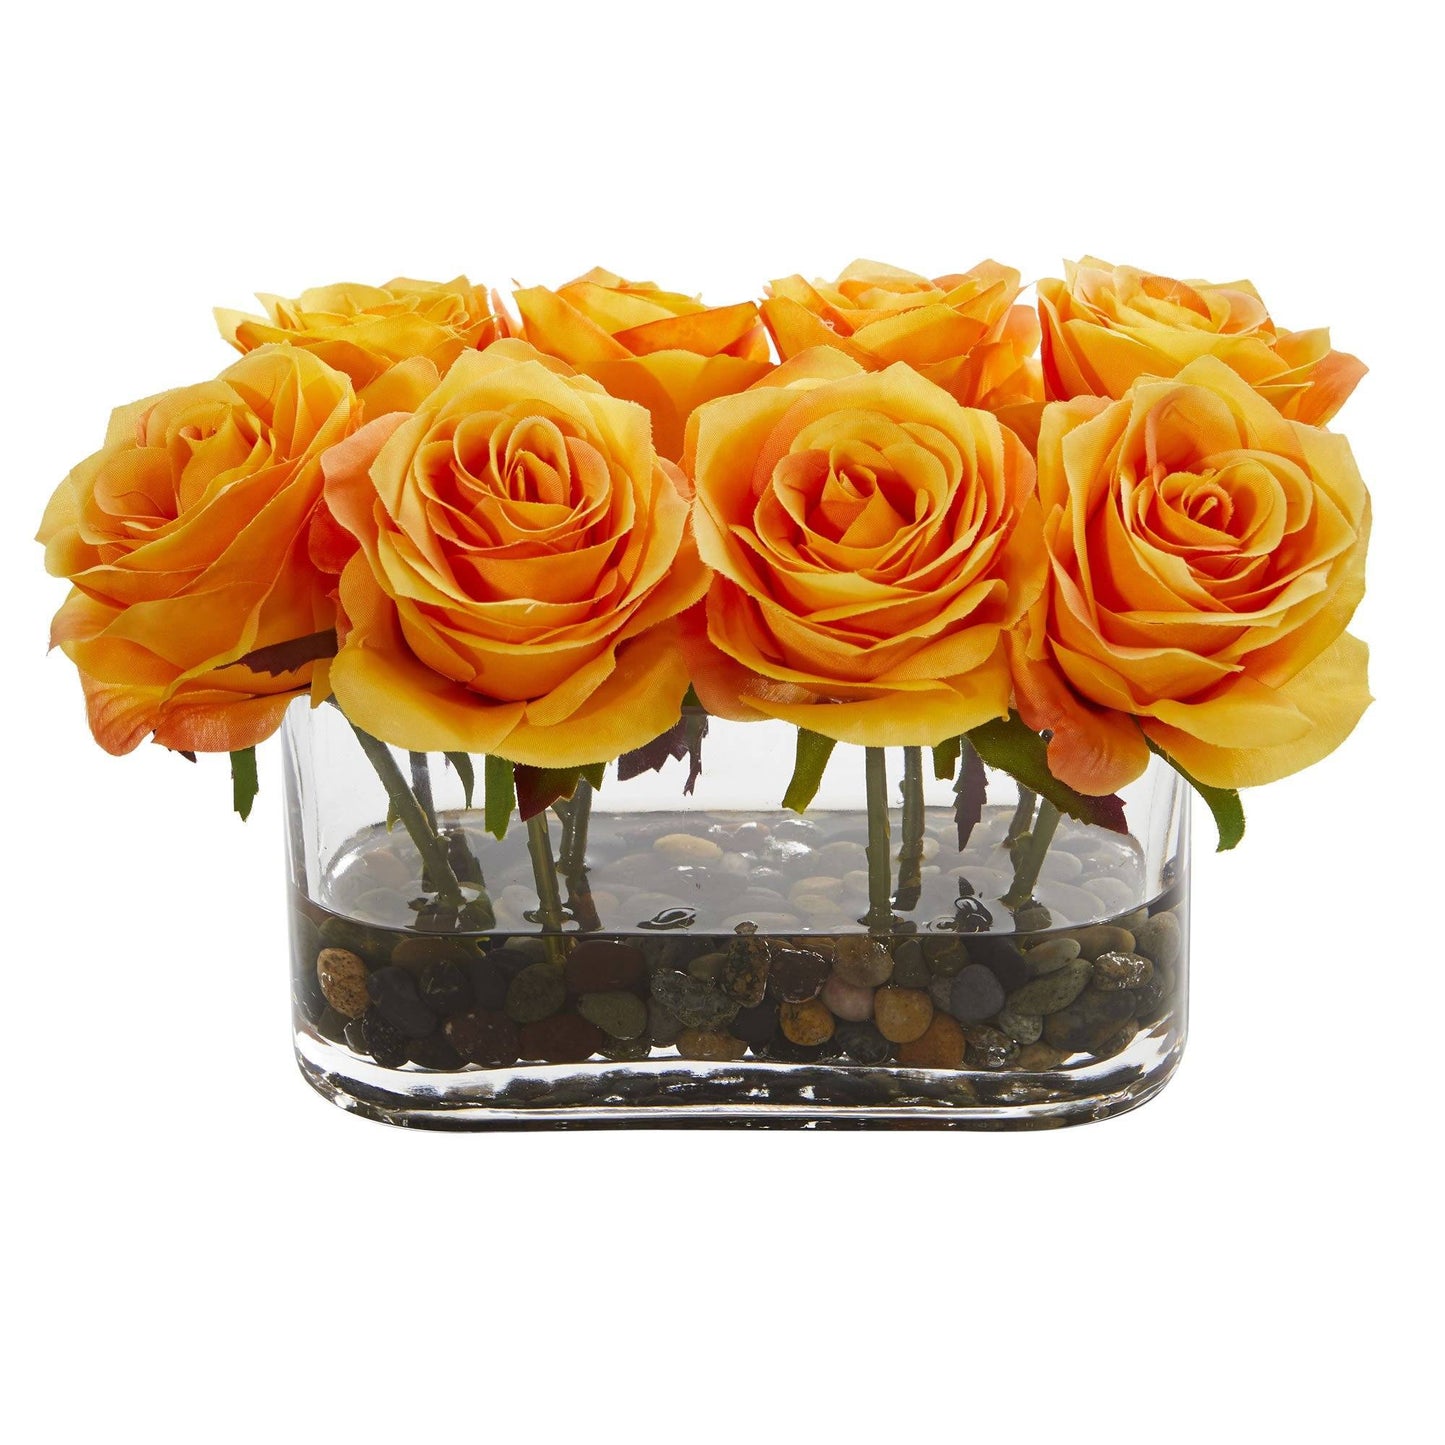 5.5” Blooming Roses in Glass Vase Artificial Arrangement by Nearly Natural